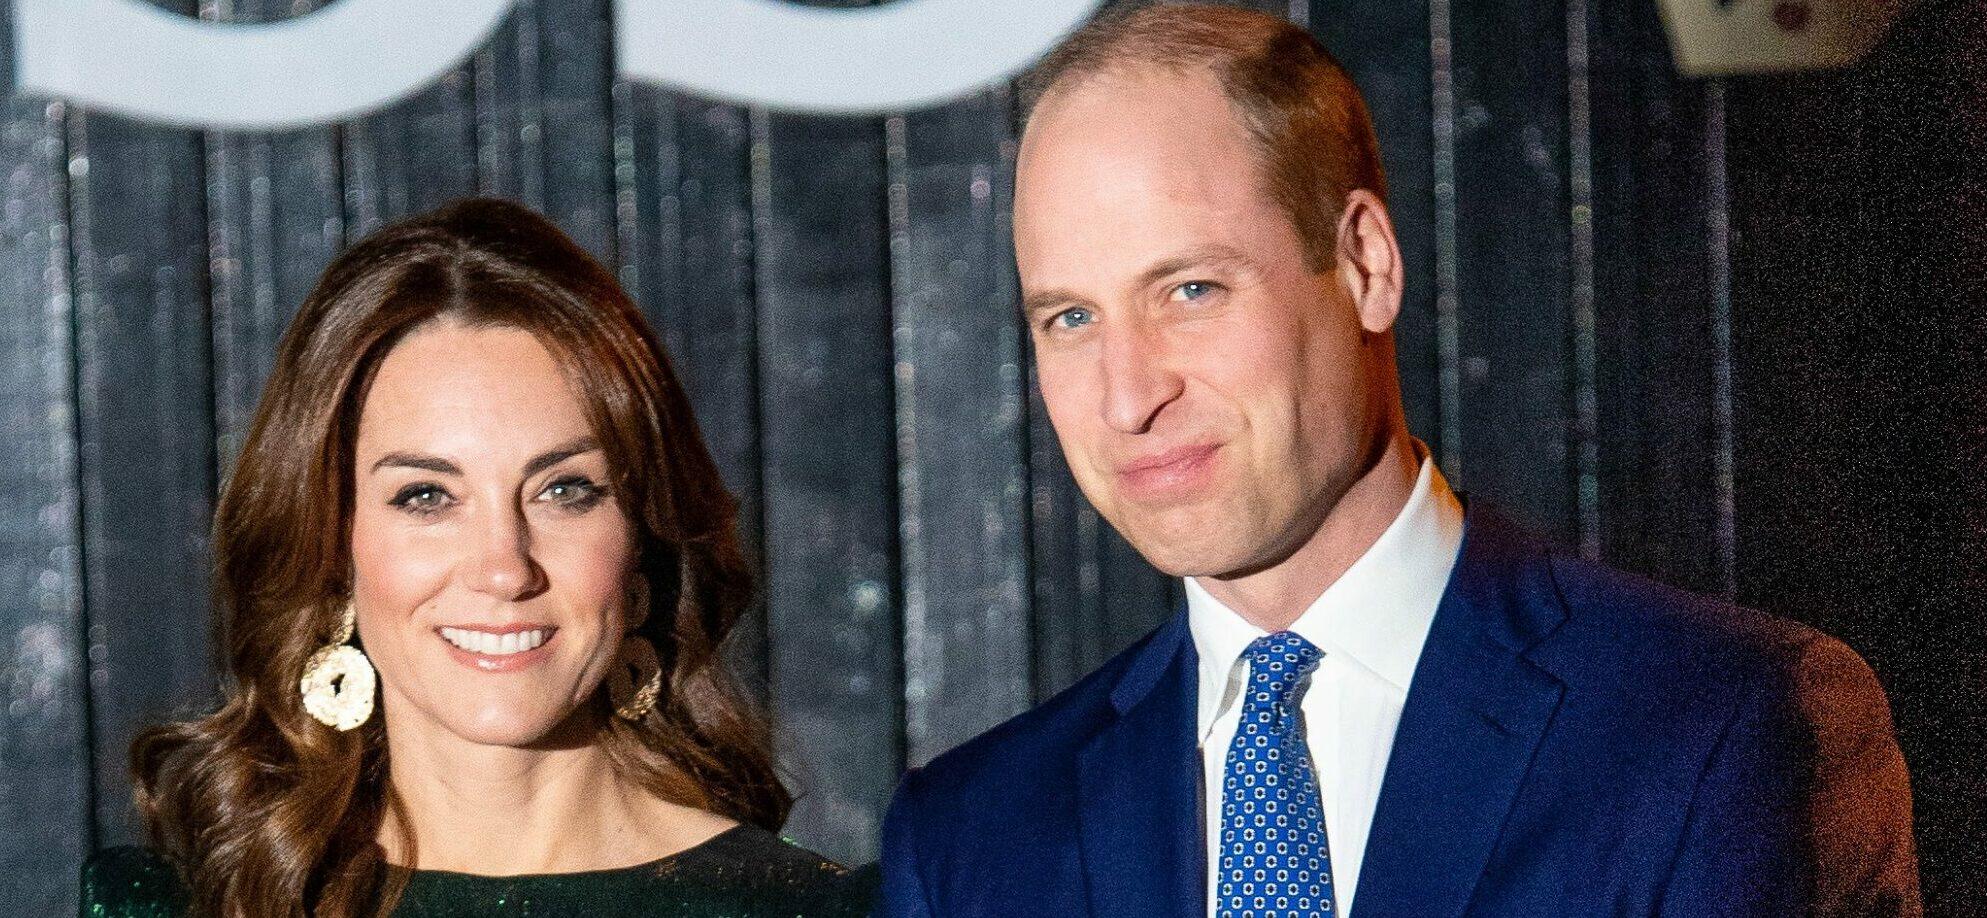 Catherine Duchess of Cambridge, Kate Middleton will celebrate het 40th birthday on the 9th of January, together with her husband Prince Willliam and their children Prince George, Princess Charlotte and Prince Louis.